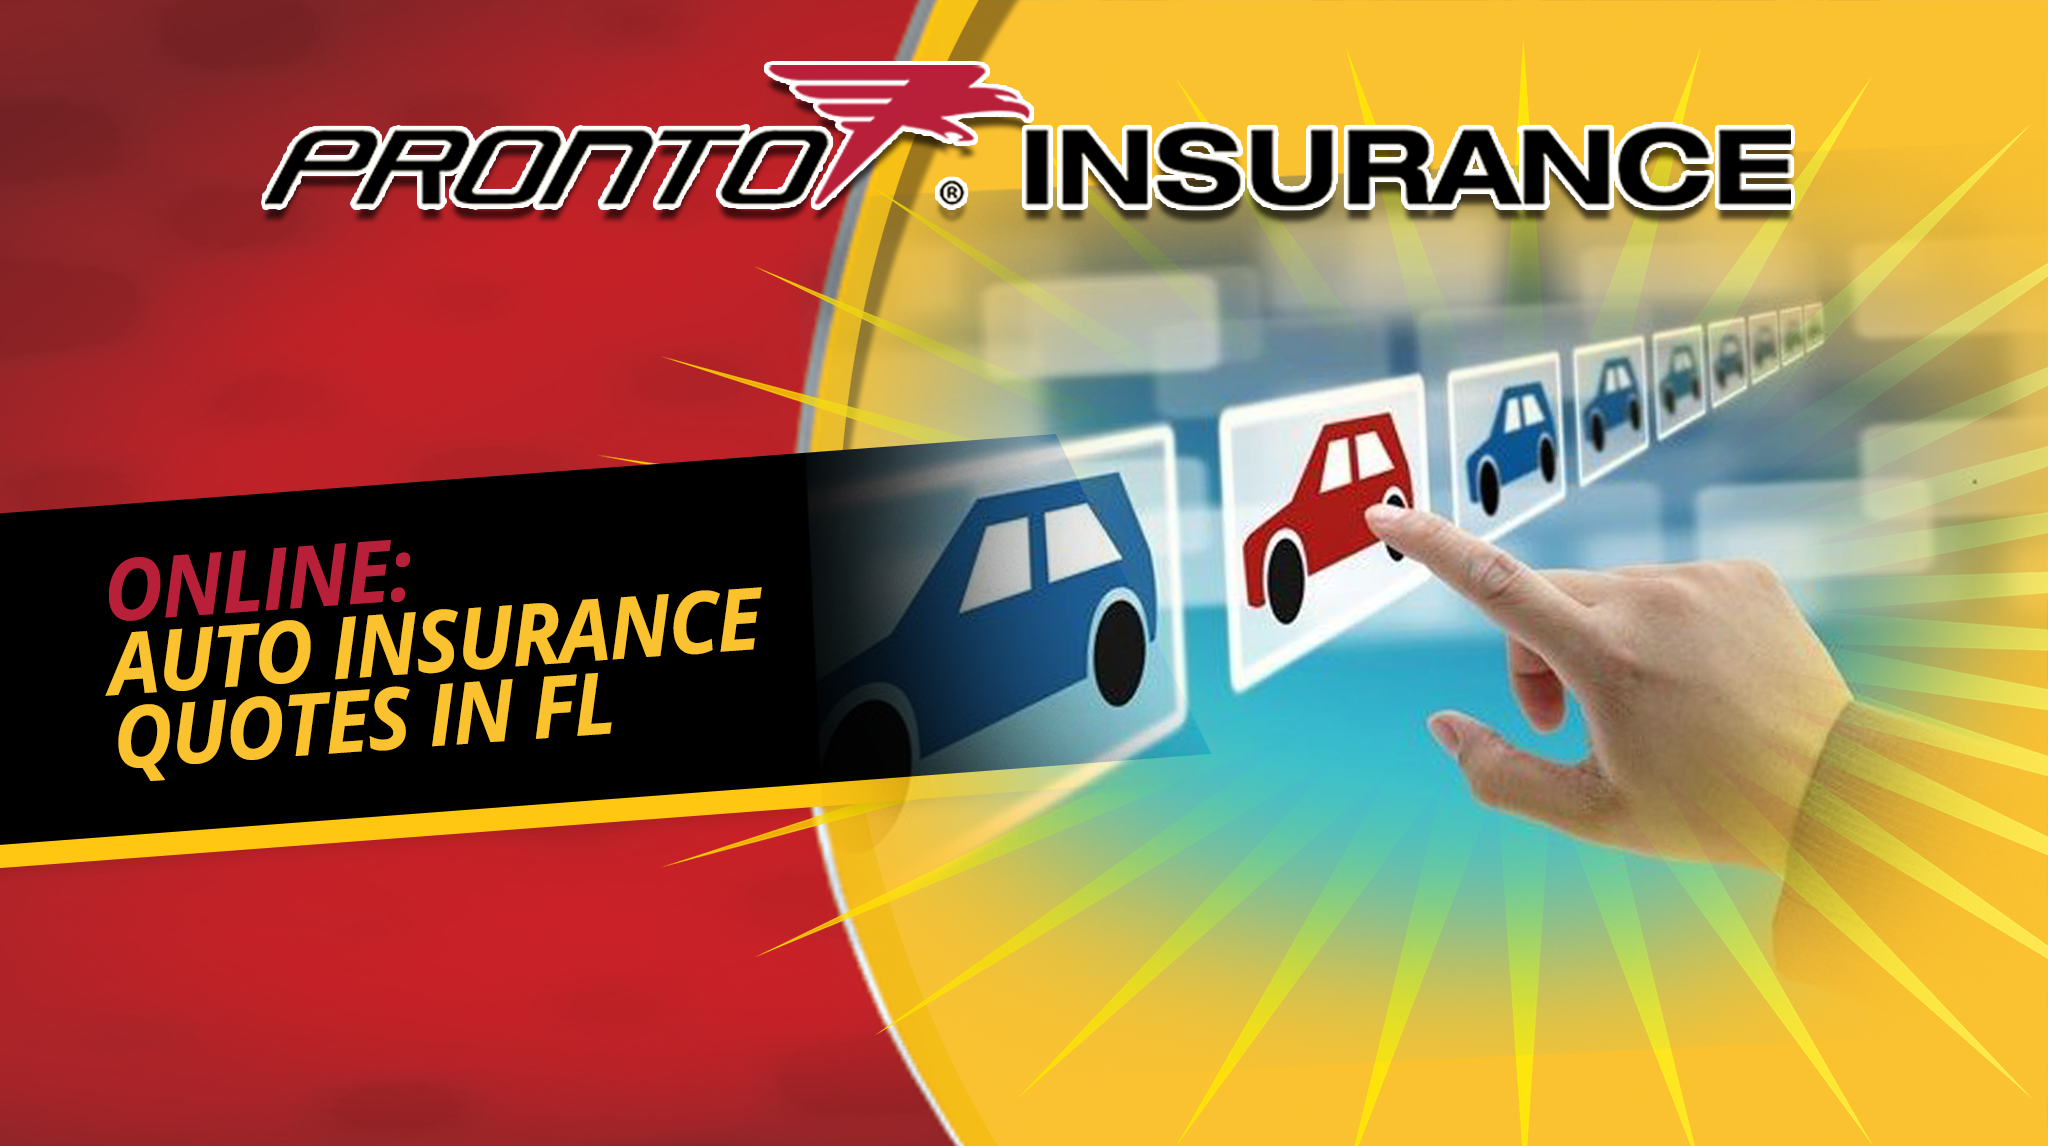 Online Auto Insurance Quotes in FL